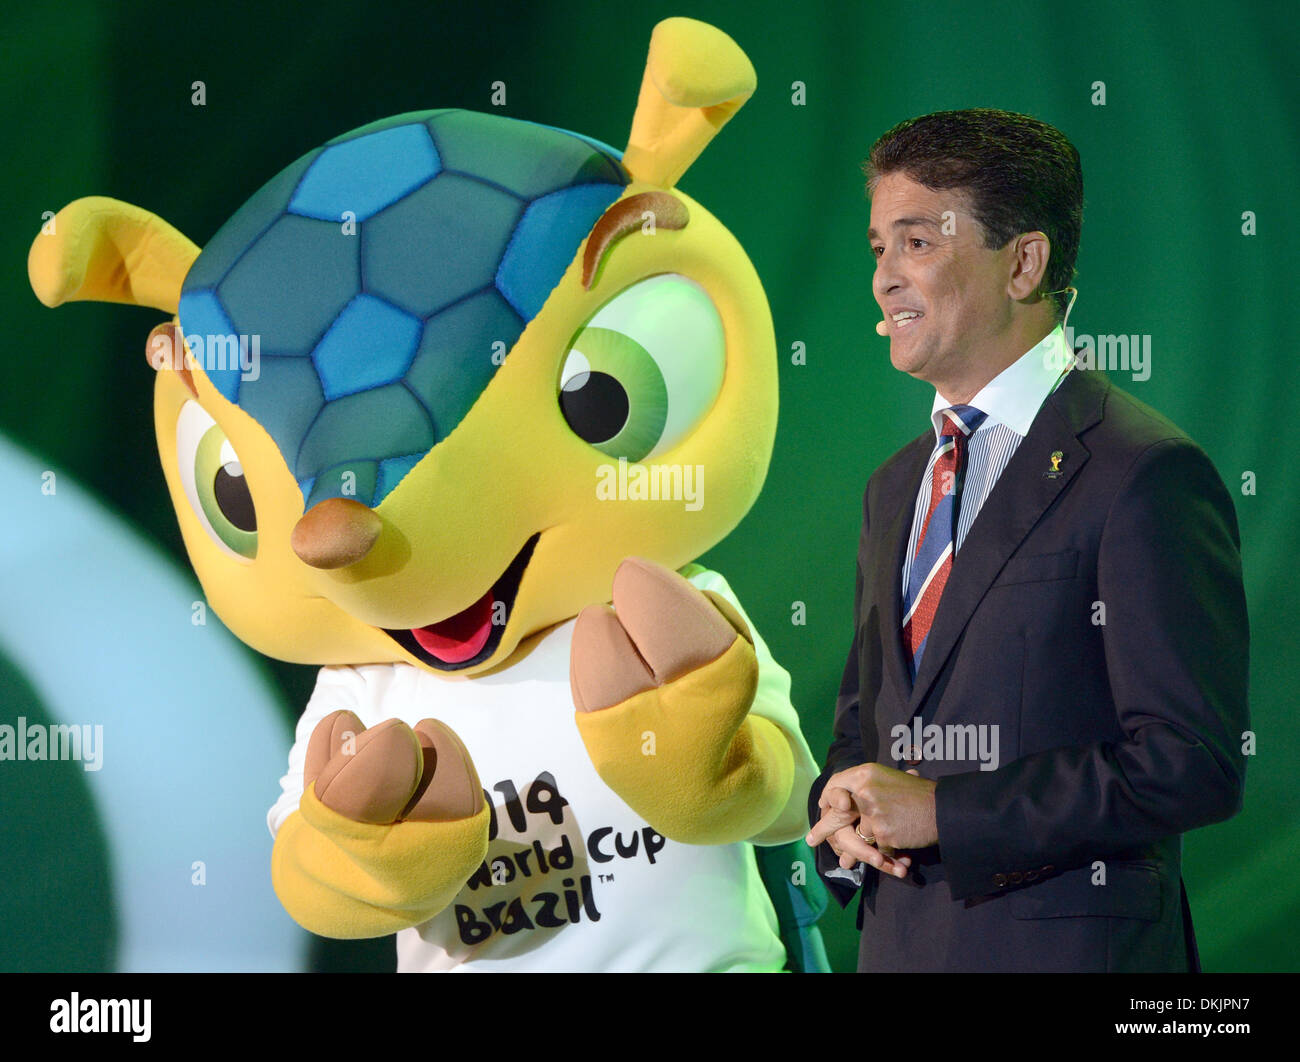 Costa do Sauipe, Brazil. 06th Dec, 2013. Mascot of Brazil 2014 Fuleco (L) accompanied by Brazilian former player Bebeto during the final draw of the preliminary round groups of the 2014 FIFA World Cup Brazil in Costa do Sauipe, Brazil, 06 December 2013. Photo: Marcus Brandt/dpa/Alamy Live News Stock Photo